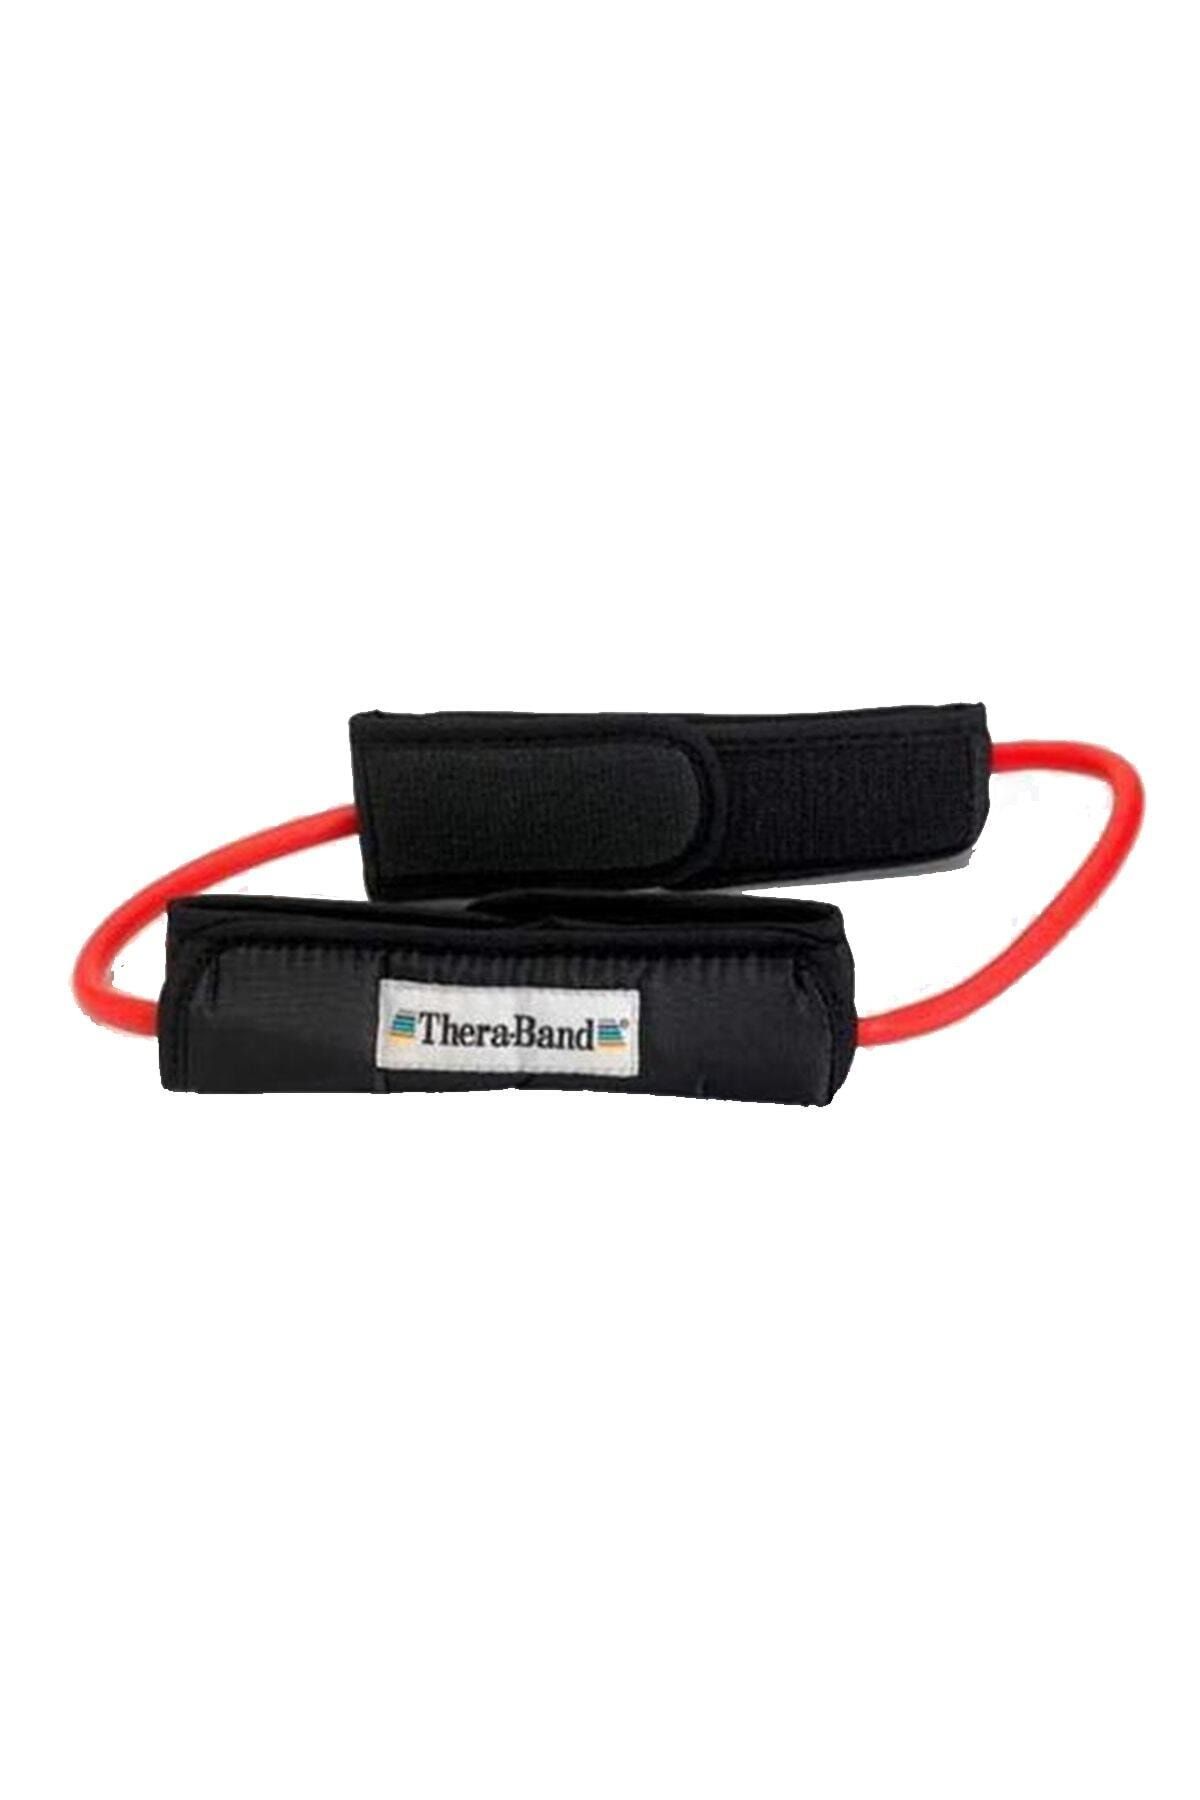 Theraband Red Tubıng Loop W/padded Cuff